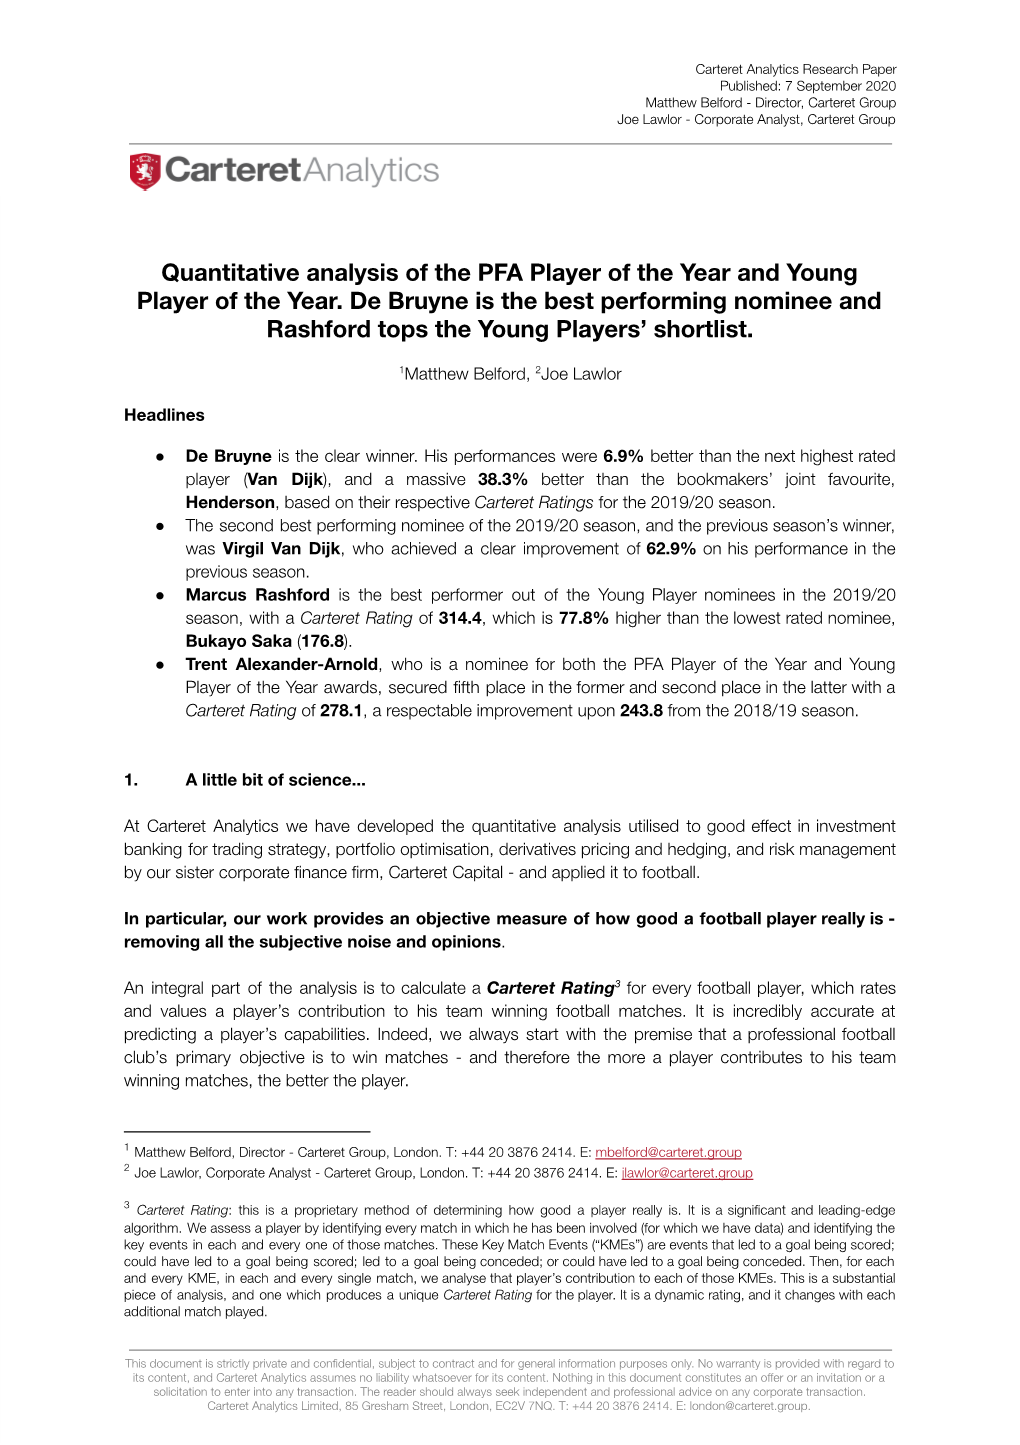 Quantitative Analysis of the PFA Player of the Year and Young Player of the Year. De Bruyne Is the Best Pe